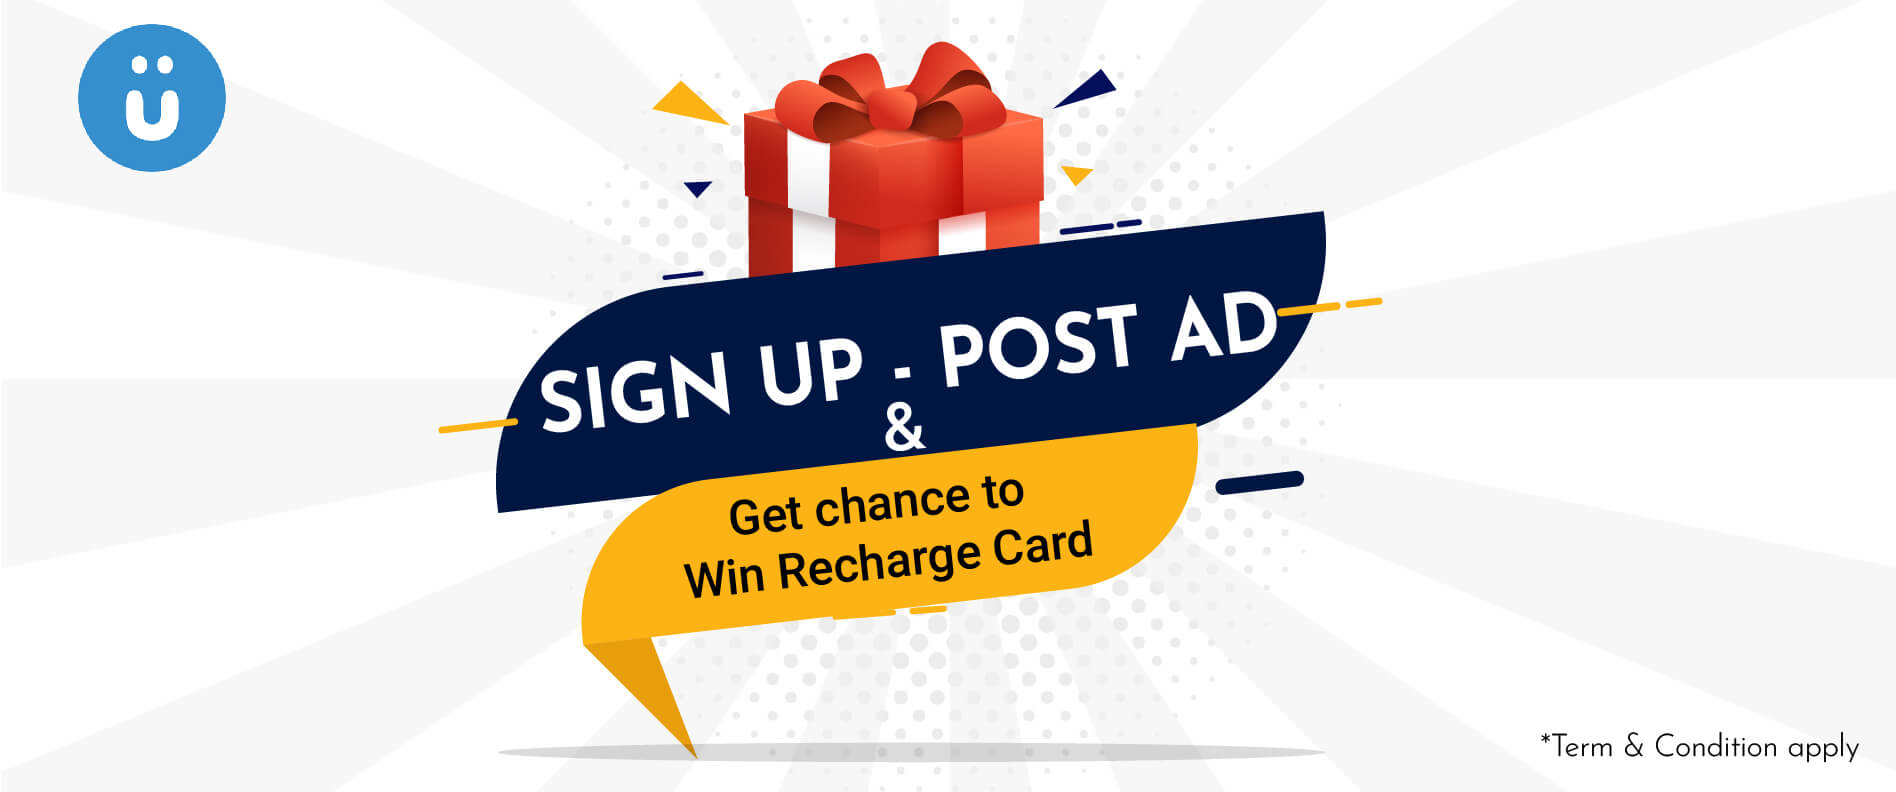 Sign Up - Post Ad & Get Chance to win a recharge card.